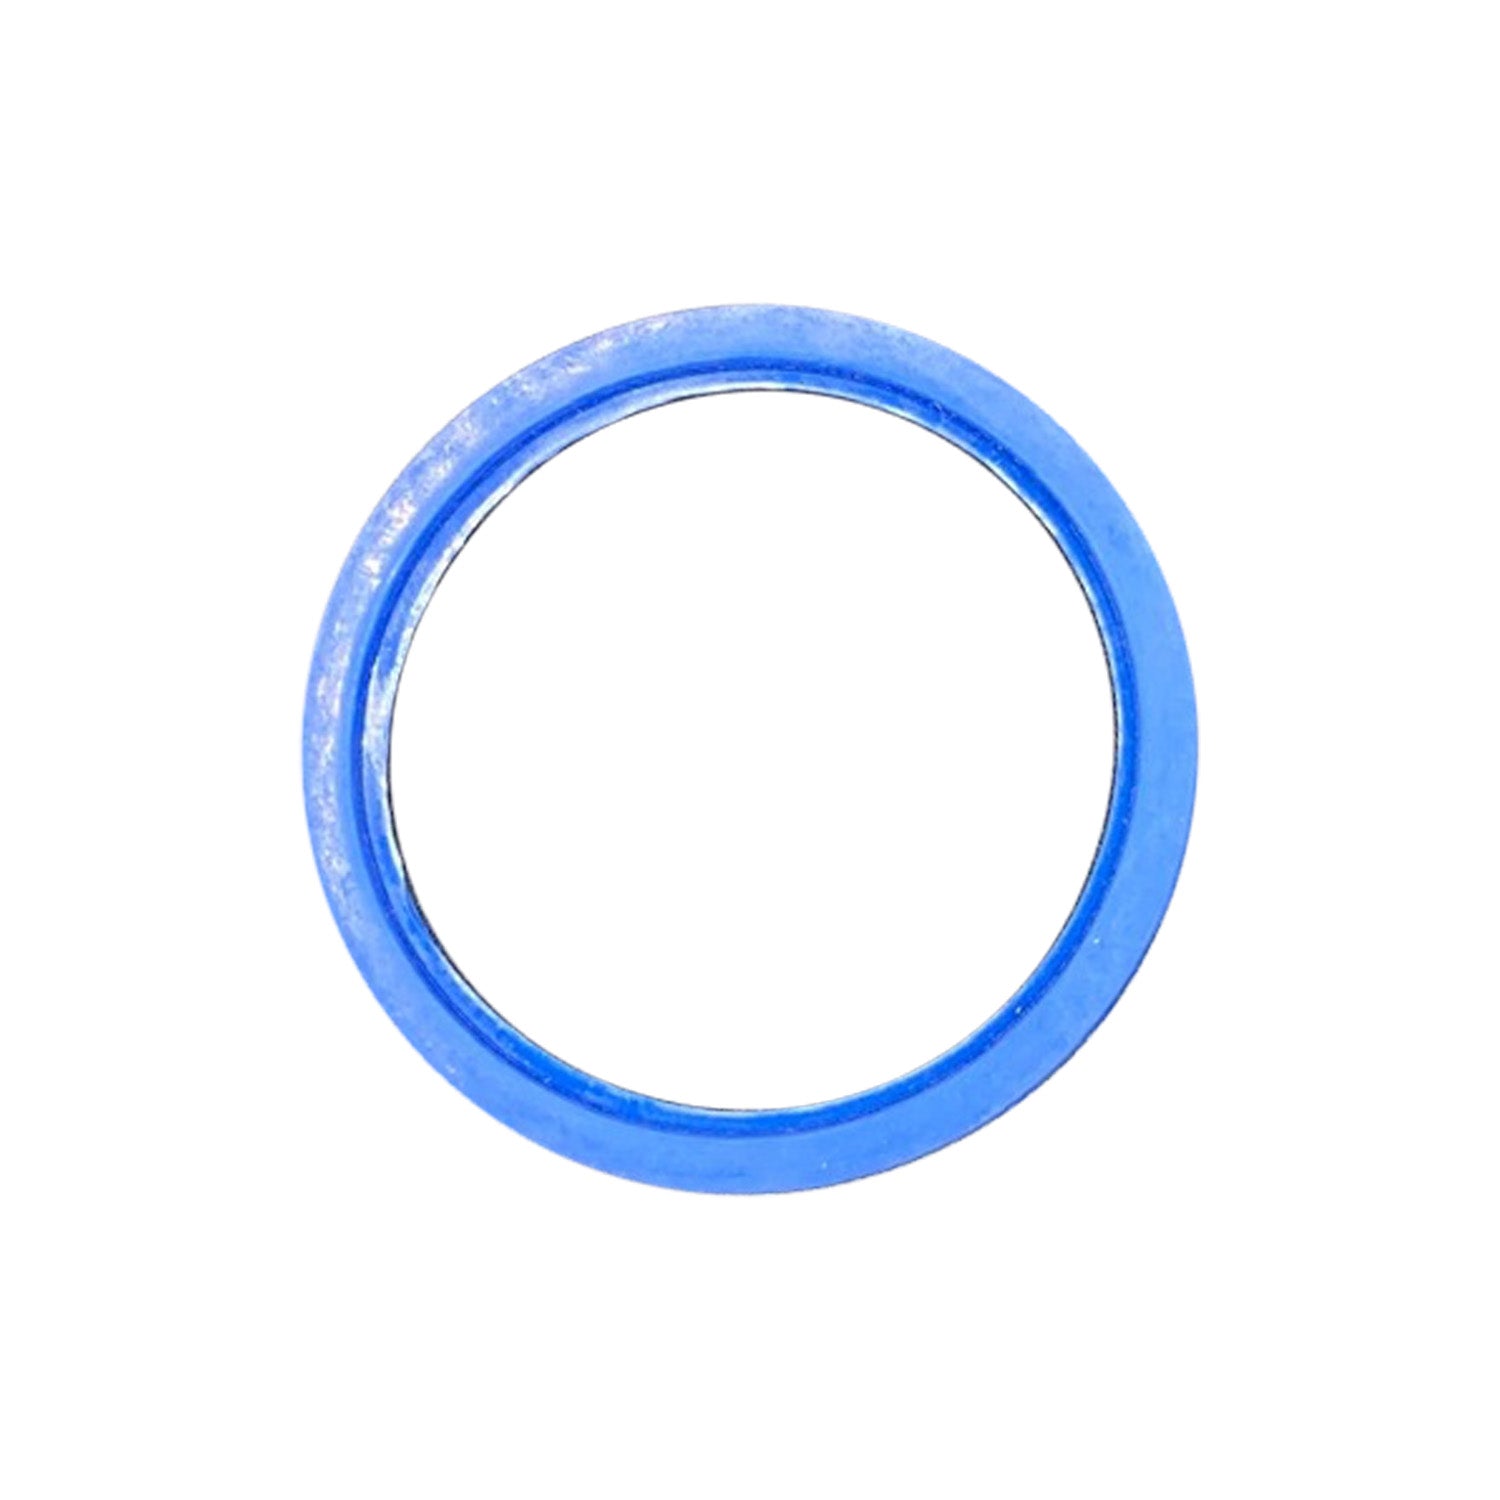 DIN Gasket, Racking Arm, Small, SMS63 (Blue)